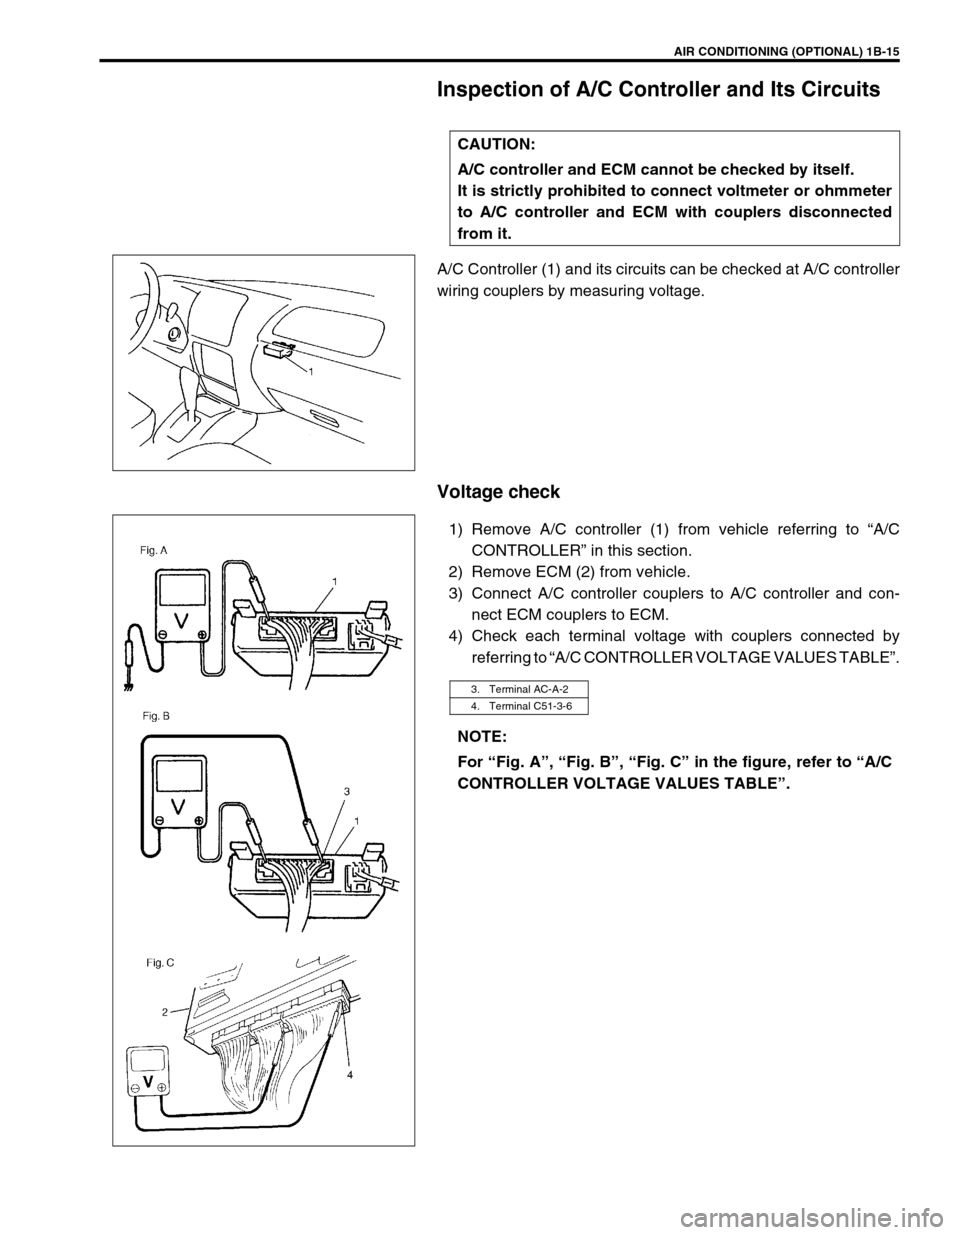 SUZUKI GRAND VITARA 2001 2.G Owners Guide AIR CONDITIONING (OPTIONAL) 1B-15
Inspection of A/C Controller and Its Circuits
A/C Controller (1) and its circuits can be checked at A/C controller
wiring couplers by measuring voltage.
Voltage check